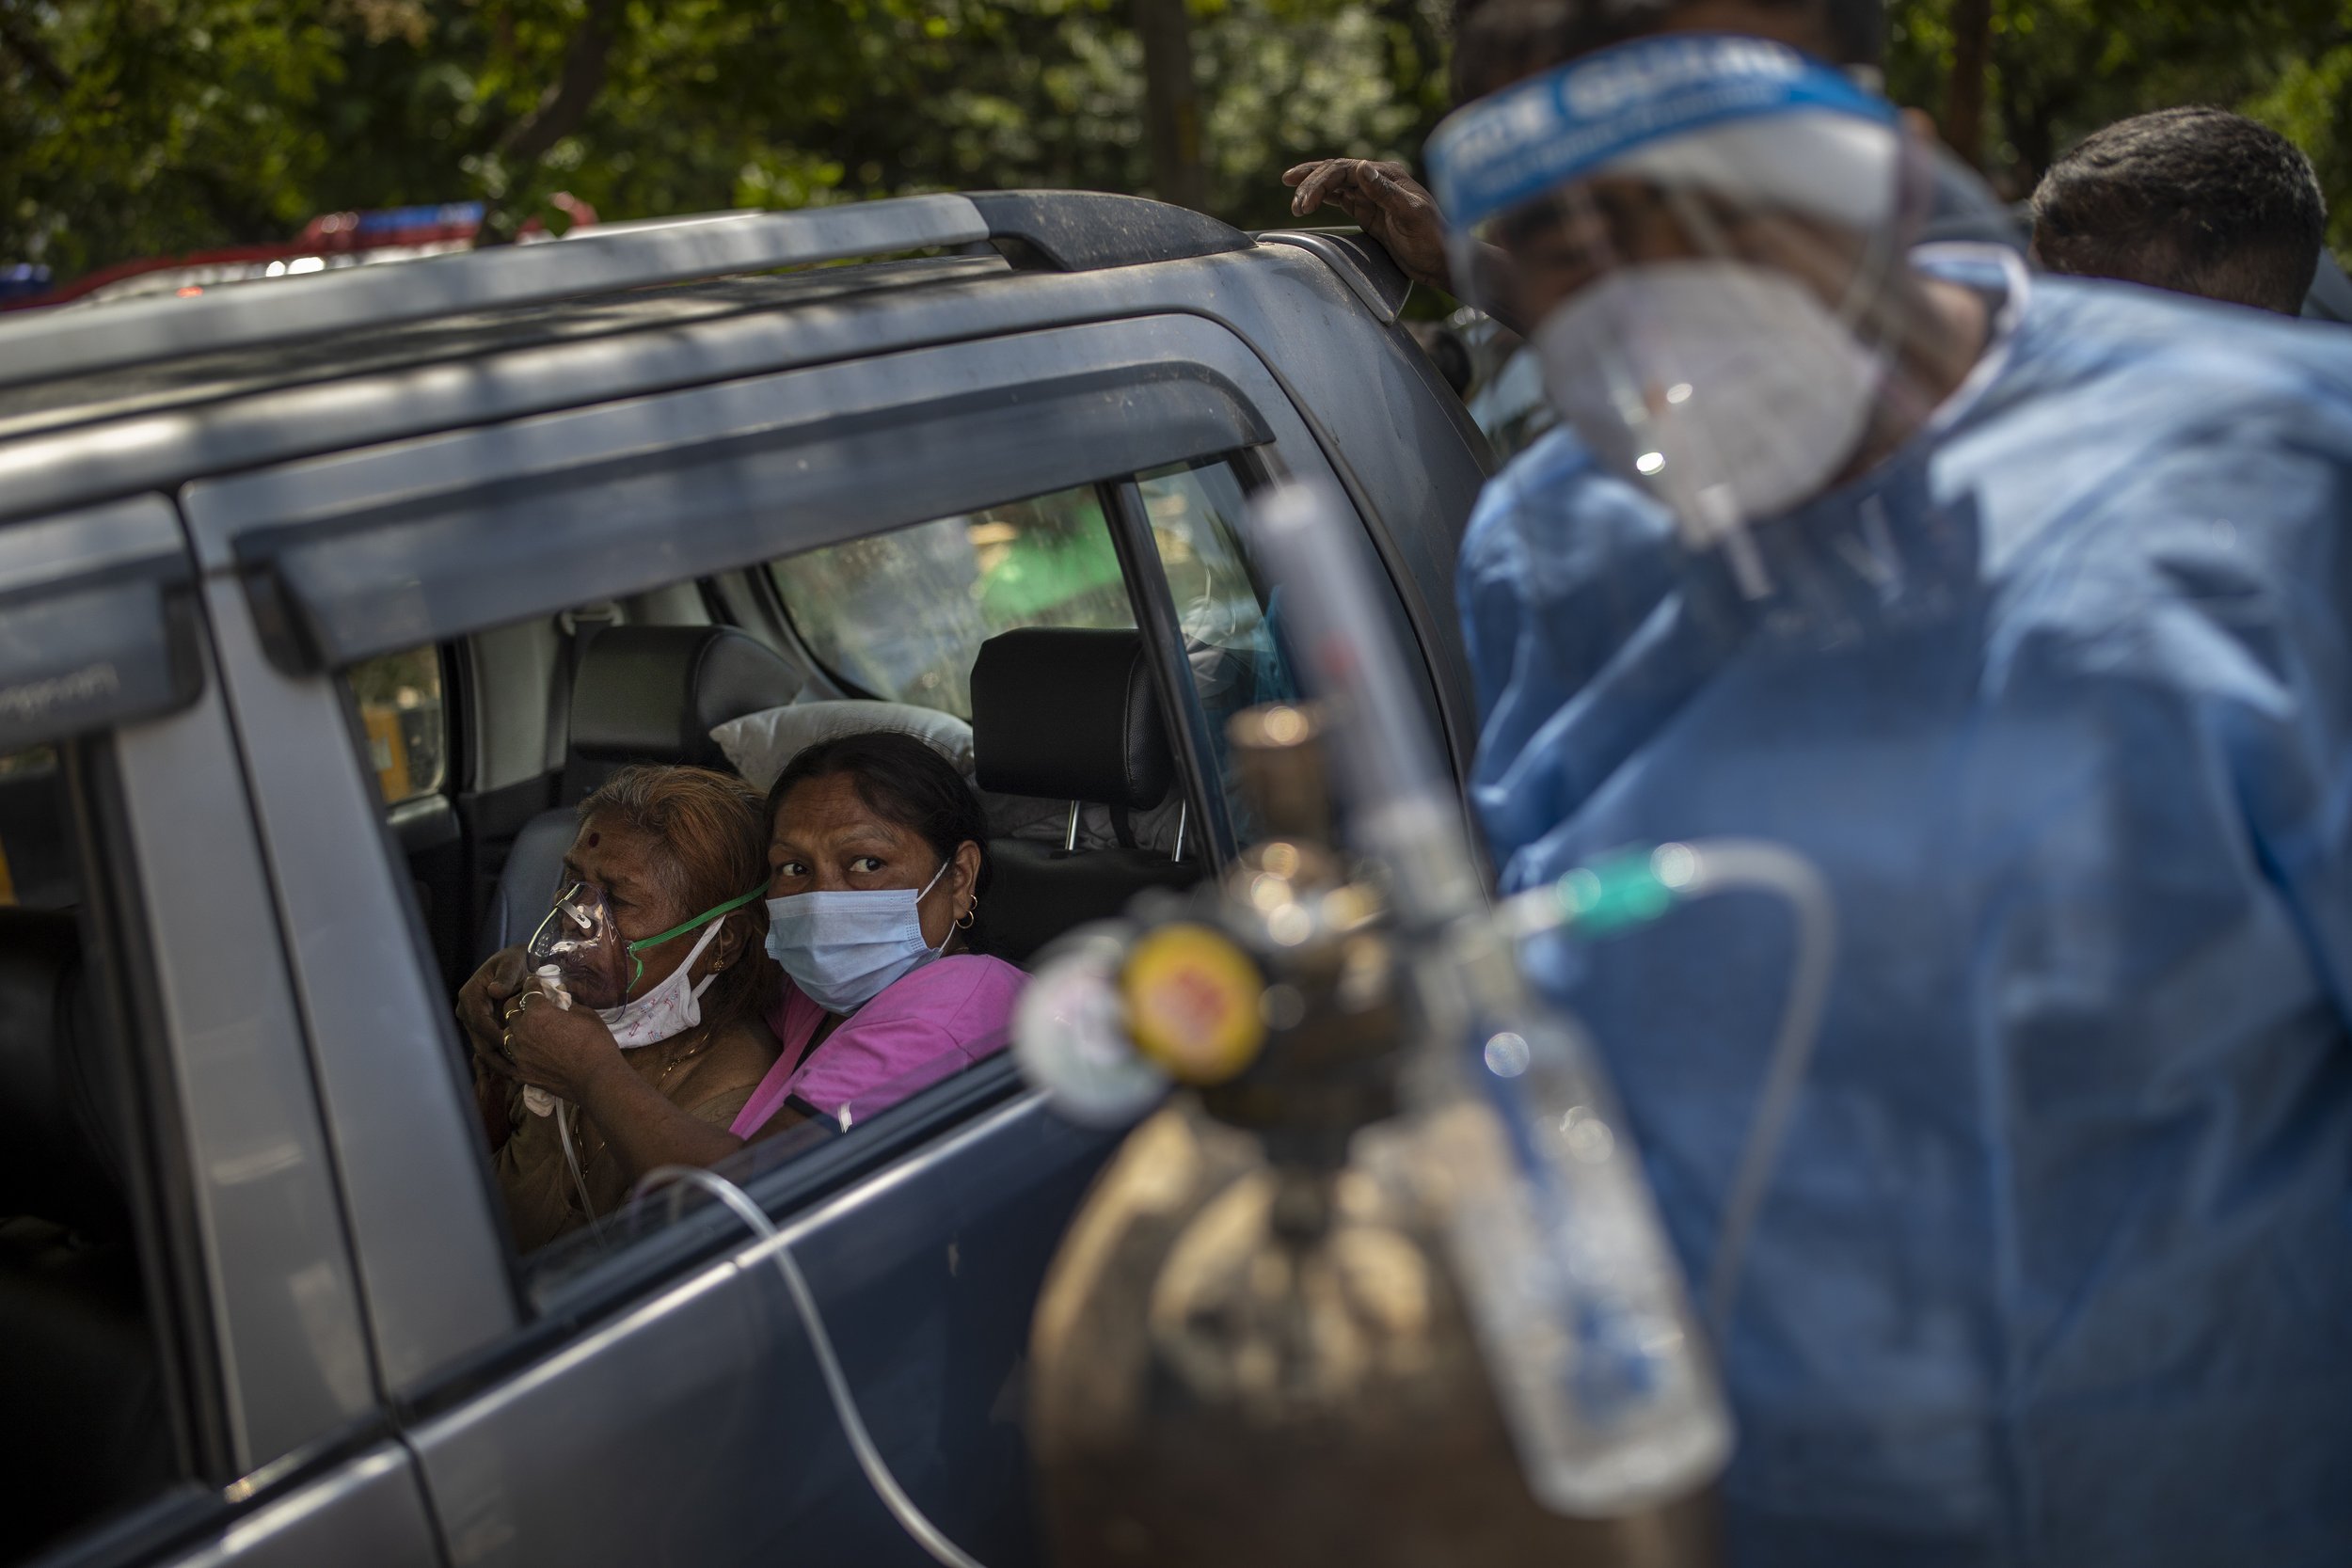  A patient in a car receives oxygen provided by a Gurdwara, a Sikh place of worship, in New Delhi, India, on April 24, 2021. India’s health system has been overwhelmed by the coronavirus pandemic, leaving patients desperate for oxygen and other suppl